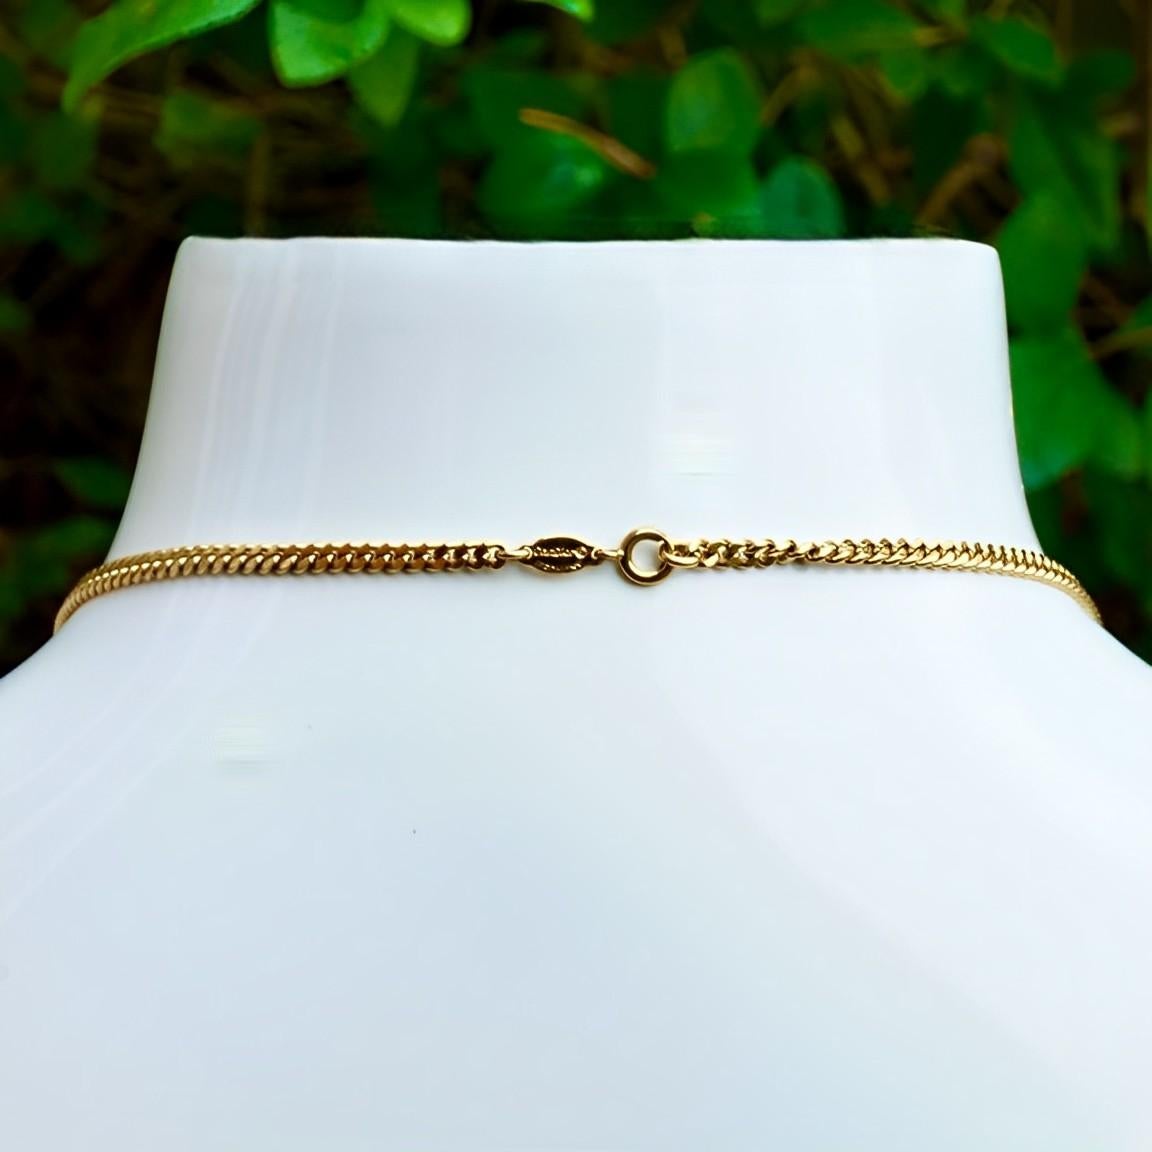 Christian Dior Long Gold Plated Curb Link Chain Necklace circa 1980s For Sale 3